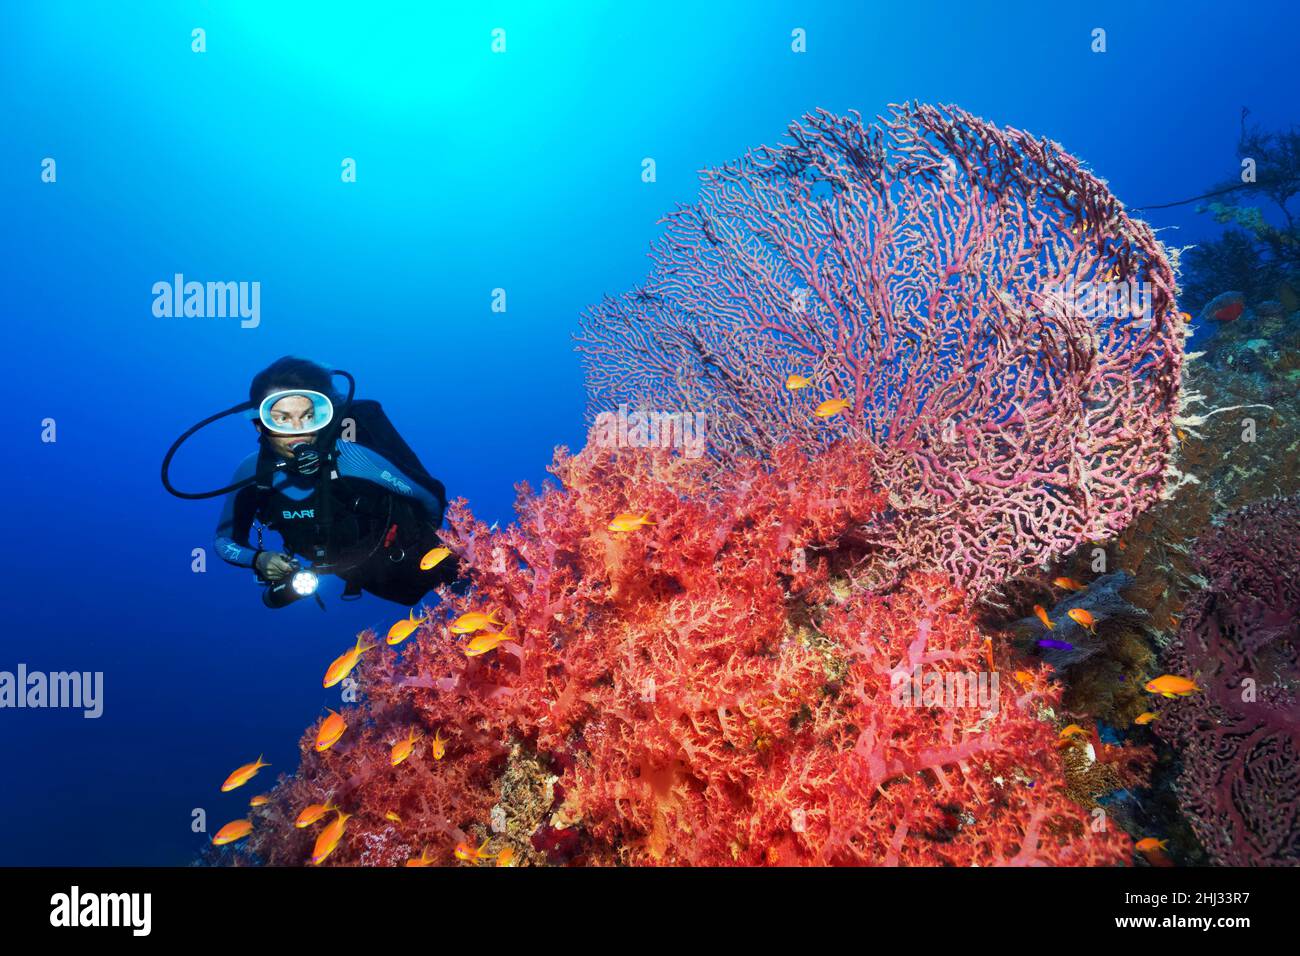 Diver looking at reef rubble overgrown with Klunzinger's soft coral (Dendronenephthya klunzingeri), gorgonian fans, unknown species, red sea basslets Stock Photo